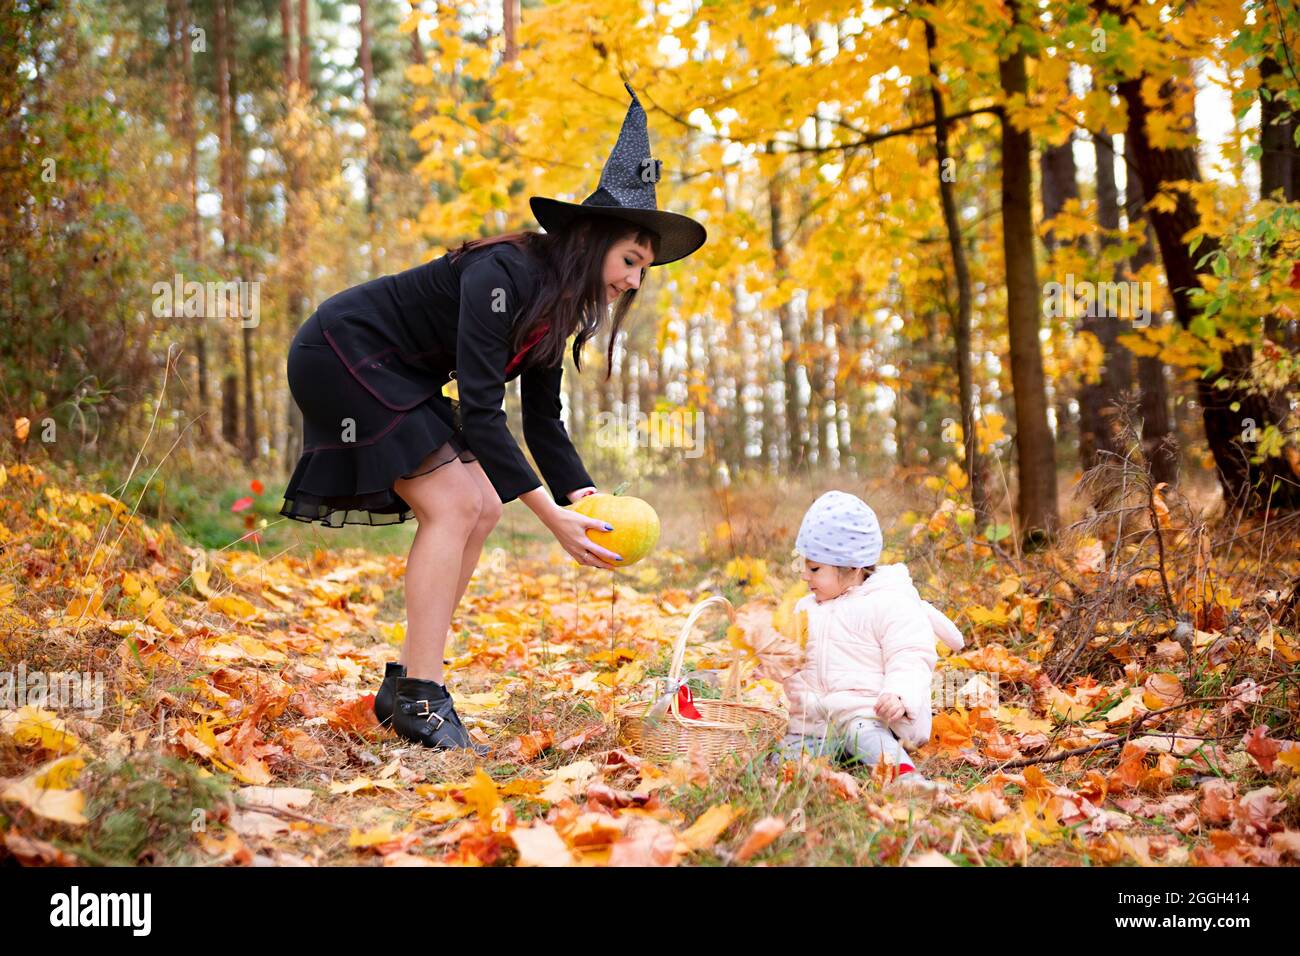 black witch woman with little toddler bunny in the autumn forest. halloween celebration, costume party. Stock Photo